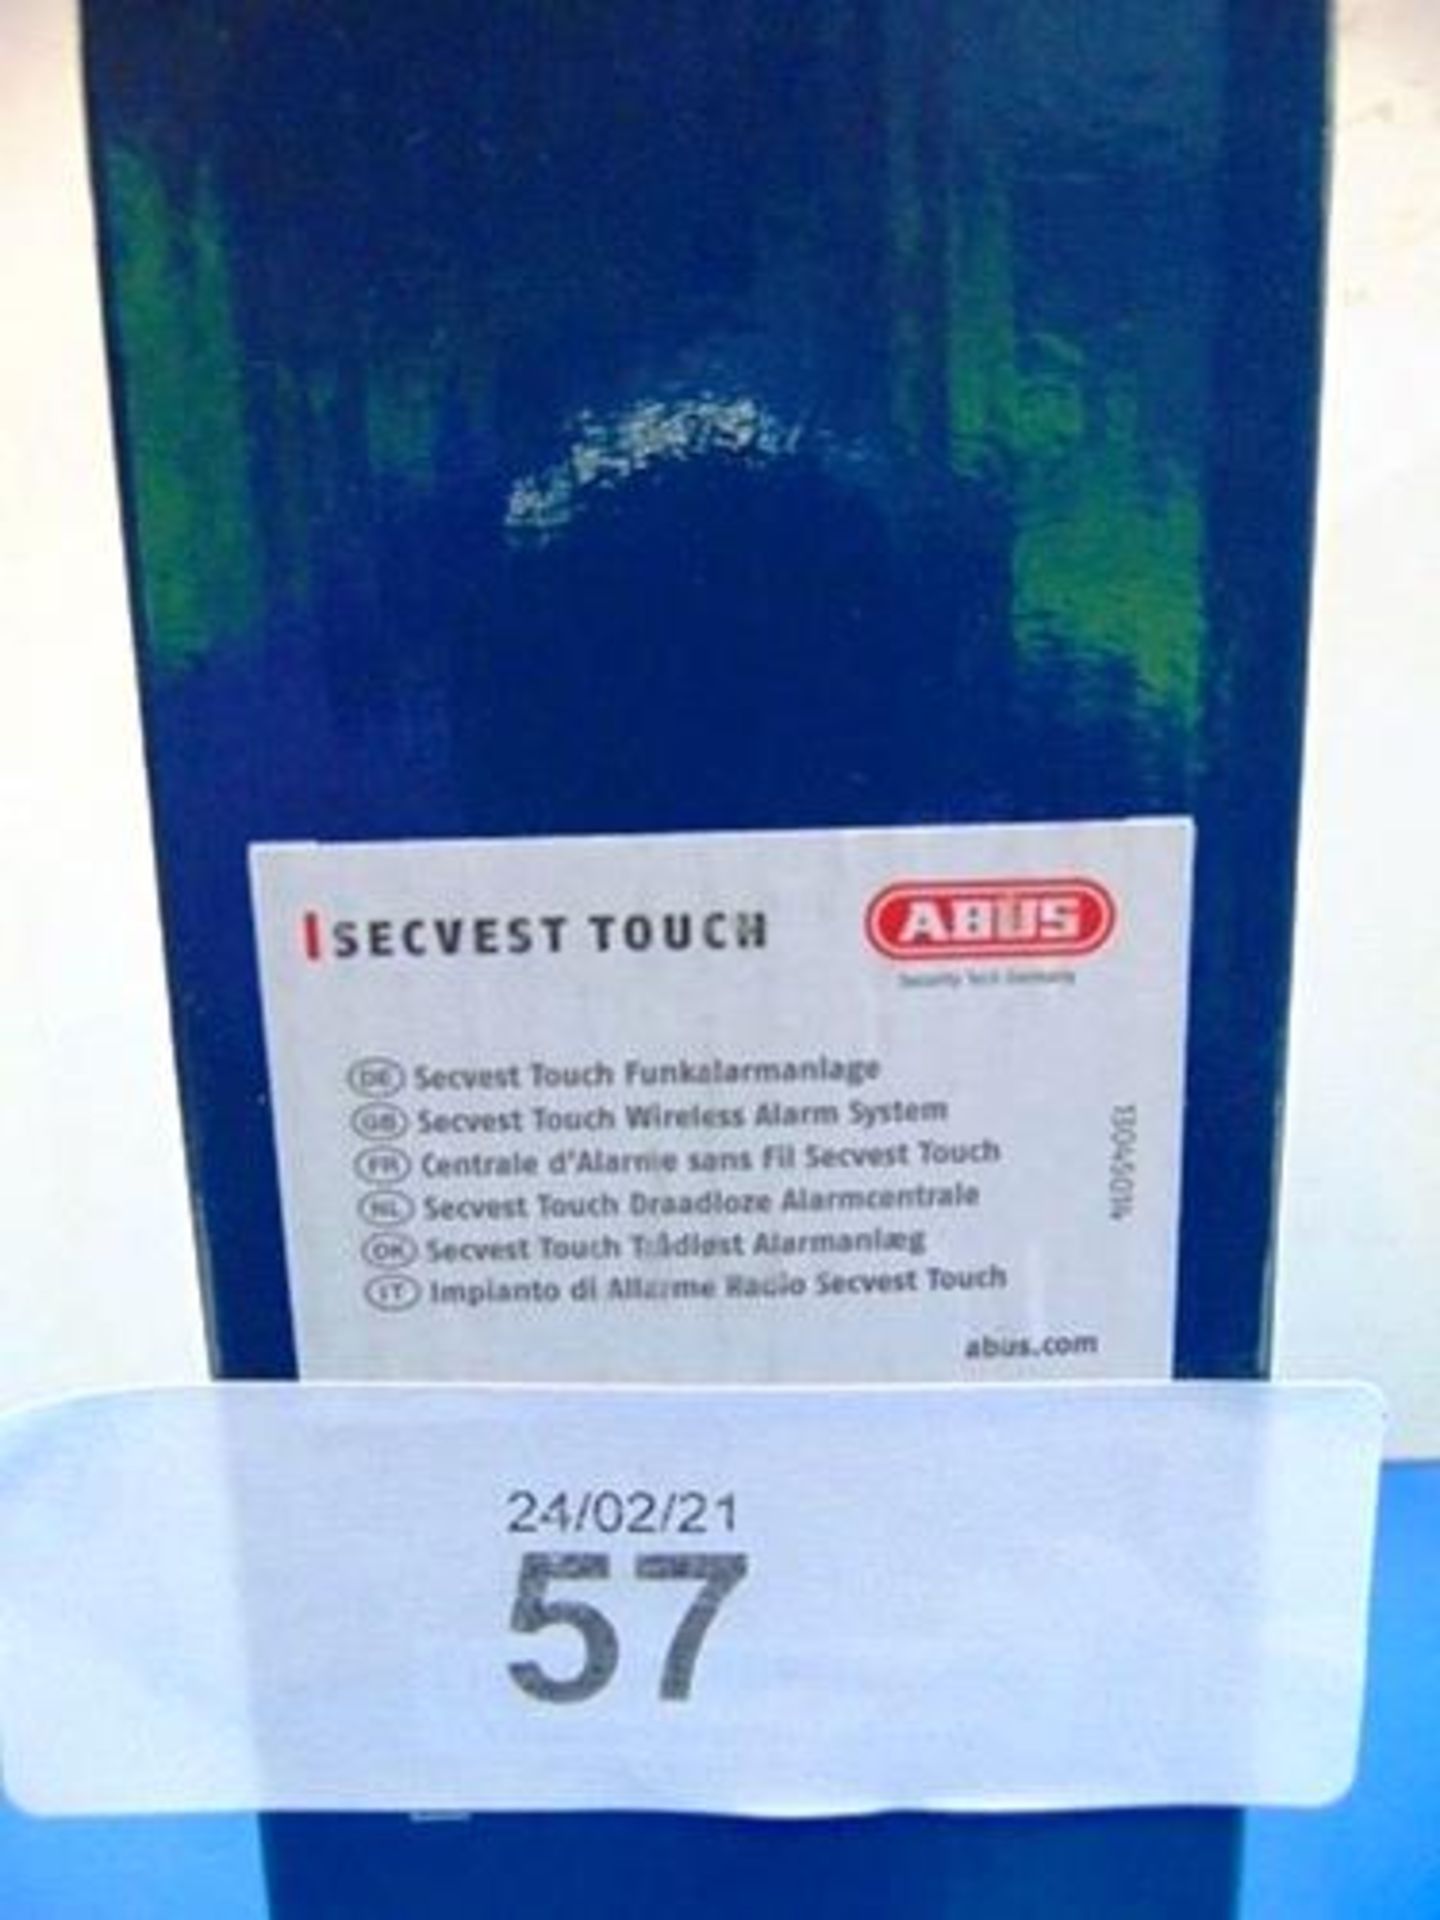 Abus Secvest touch wireless alarm system, model FUAA50500, control panel only - Sealed new in box ( - Image 3 of 3